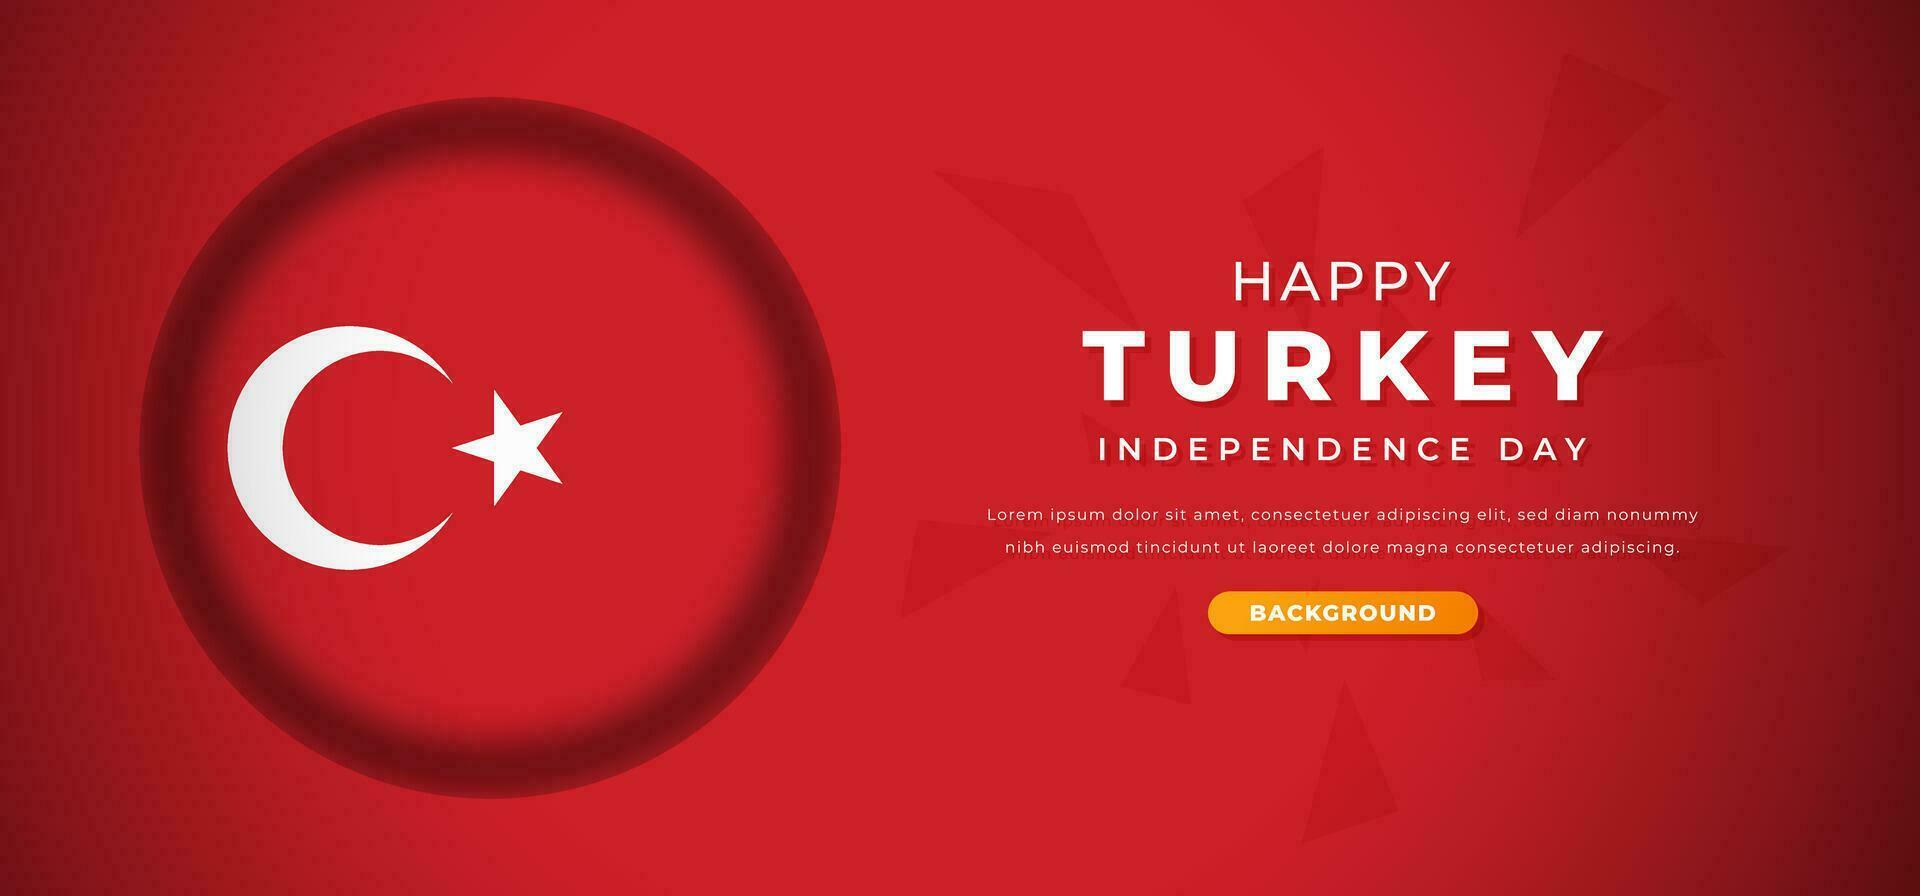 Happy Turkey Independence Day Design Paper Cut Shapes Background Illustration for Poster, Banner, Advertising, Greeting Card vector